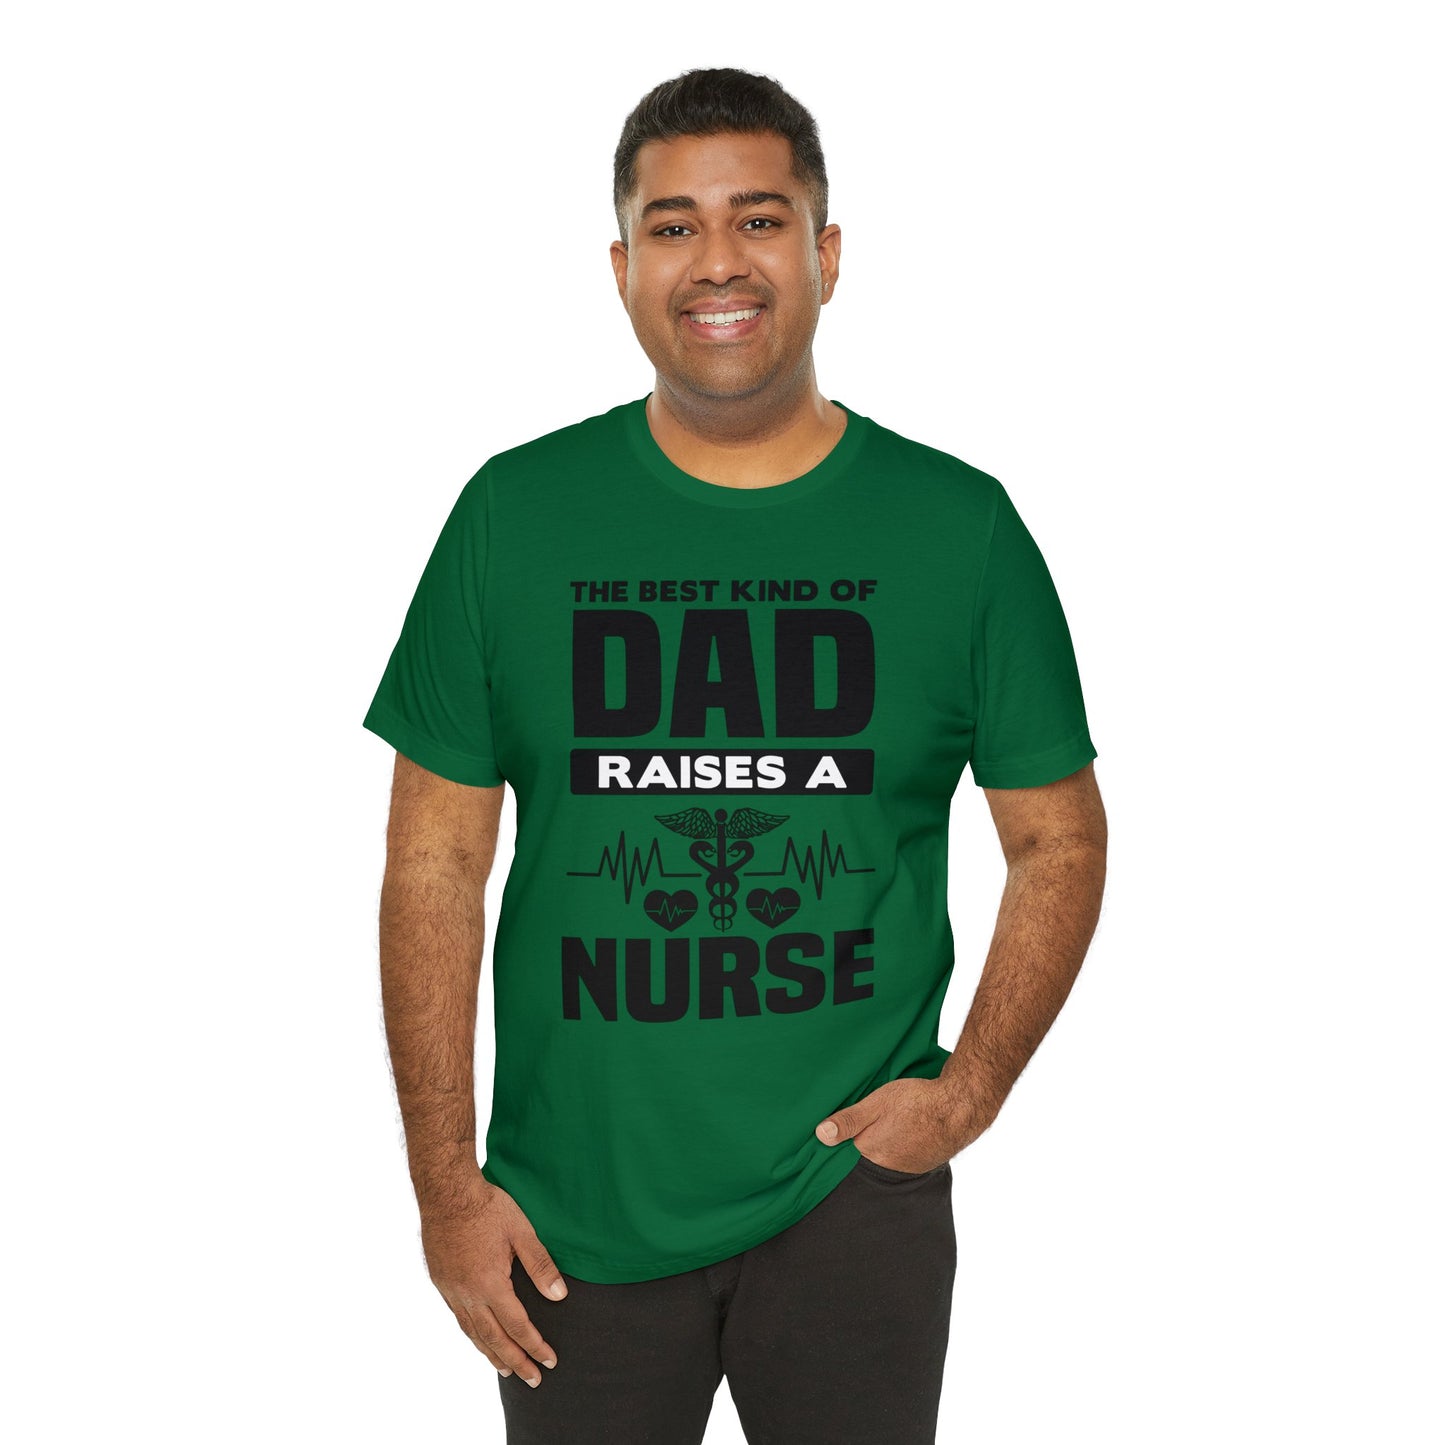 Best Kind of Dad Raised Nurse T-Shirt - Perfect Appreciation Tee for Healthcare Dads!